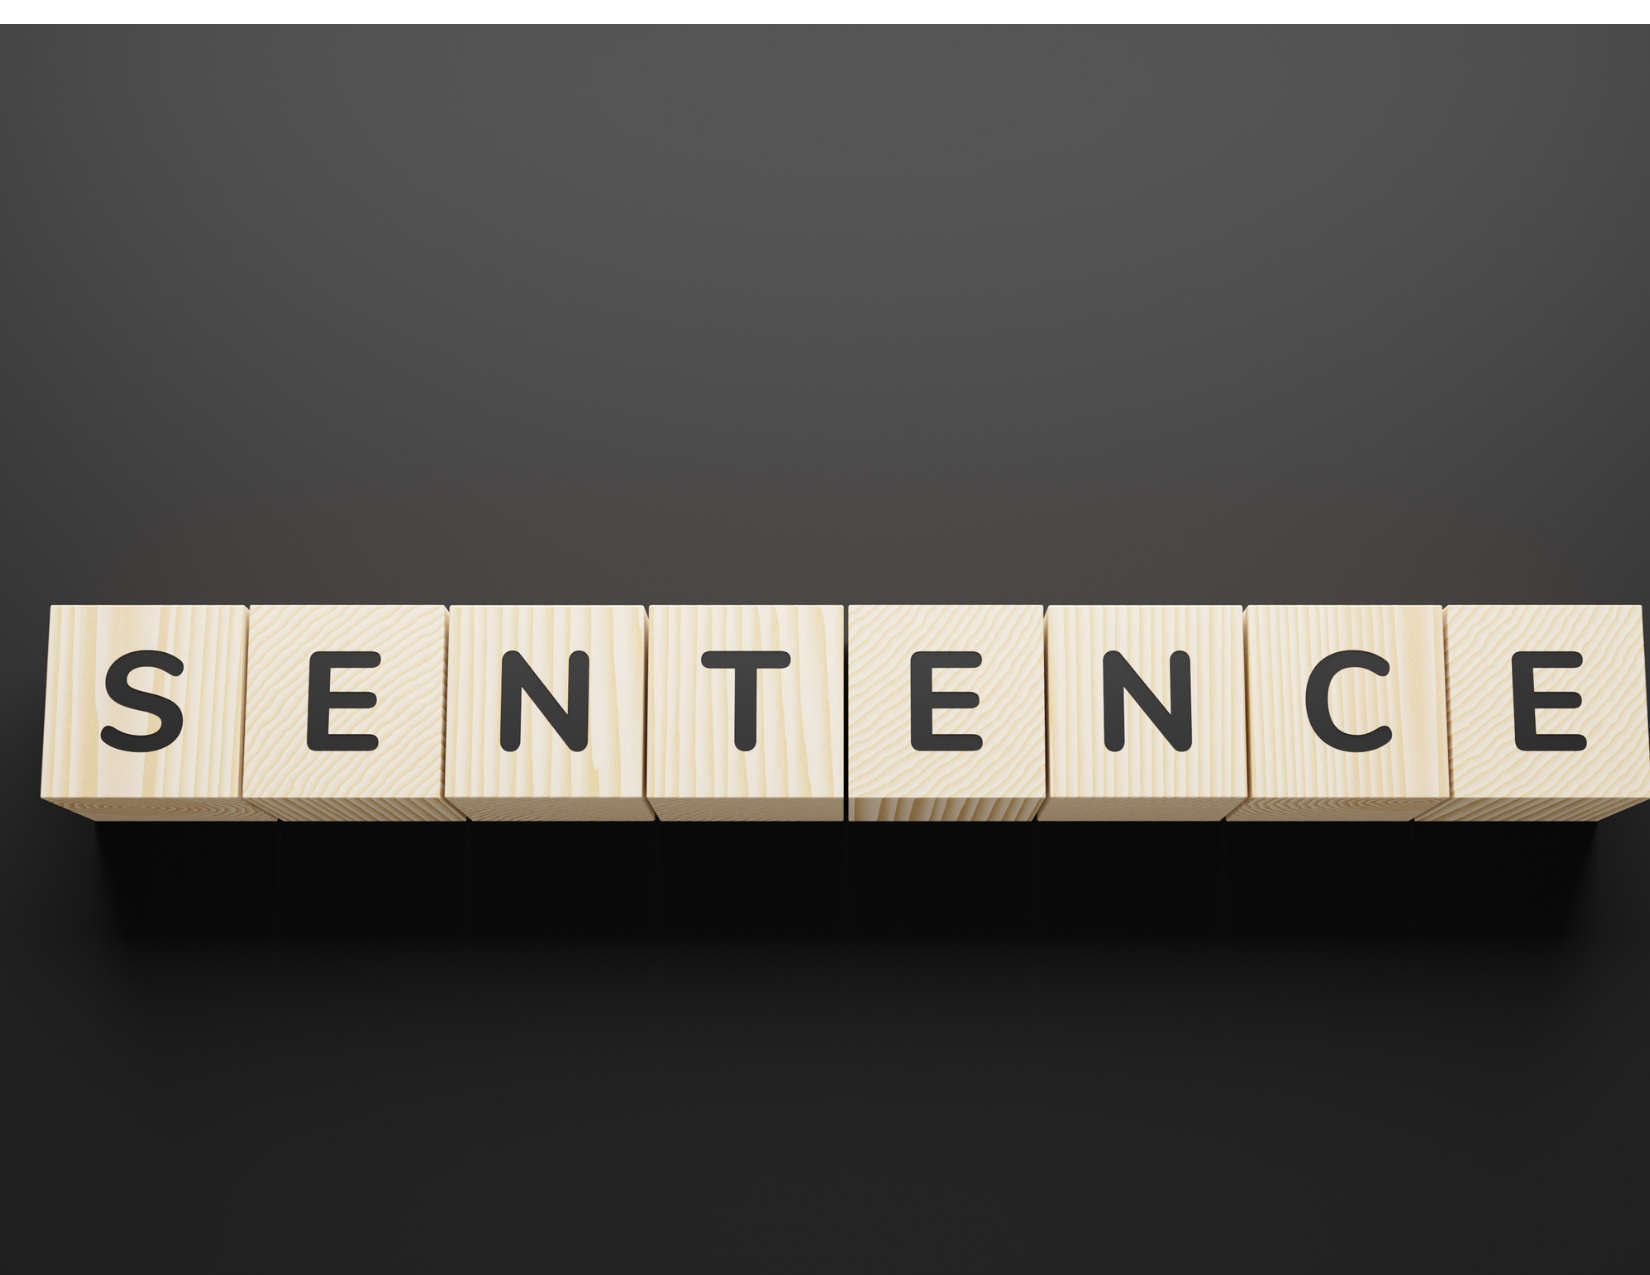 A picture of the word "sentence" made up of bingo blogs to signify a simple sentence